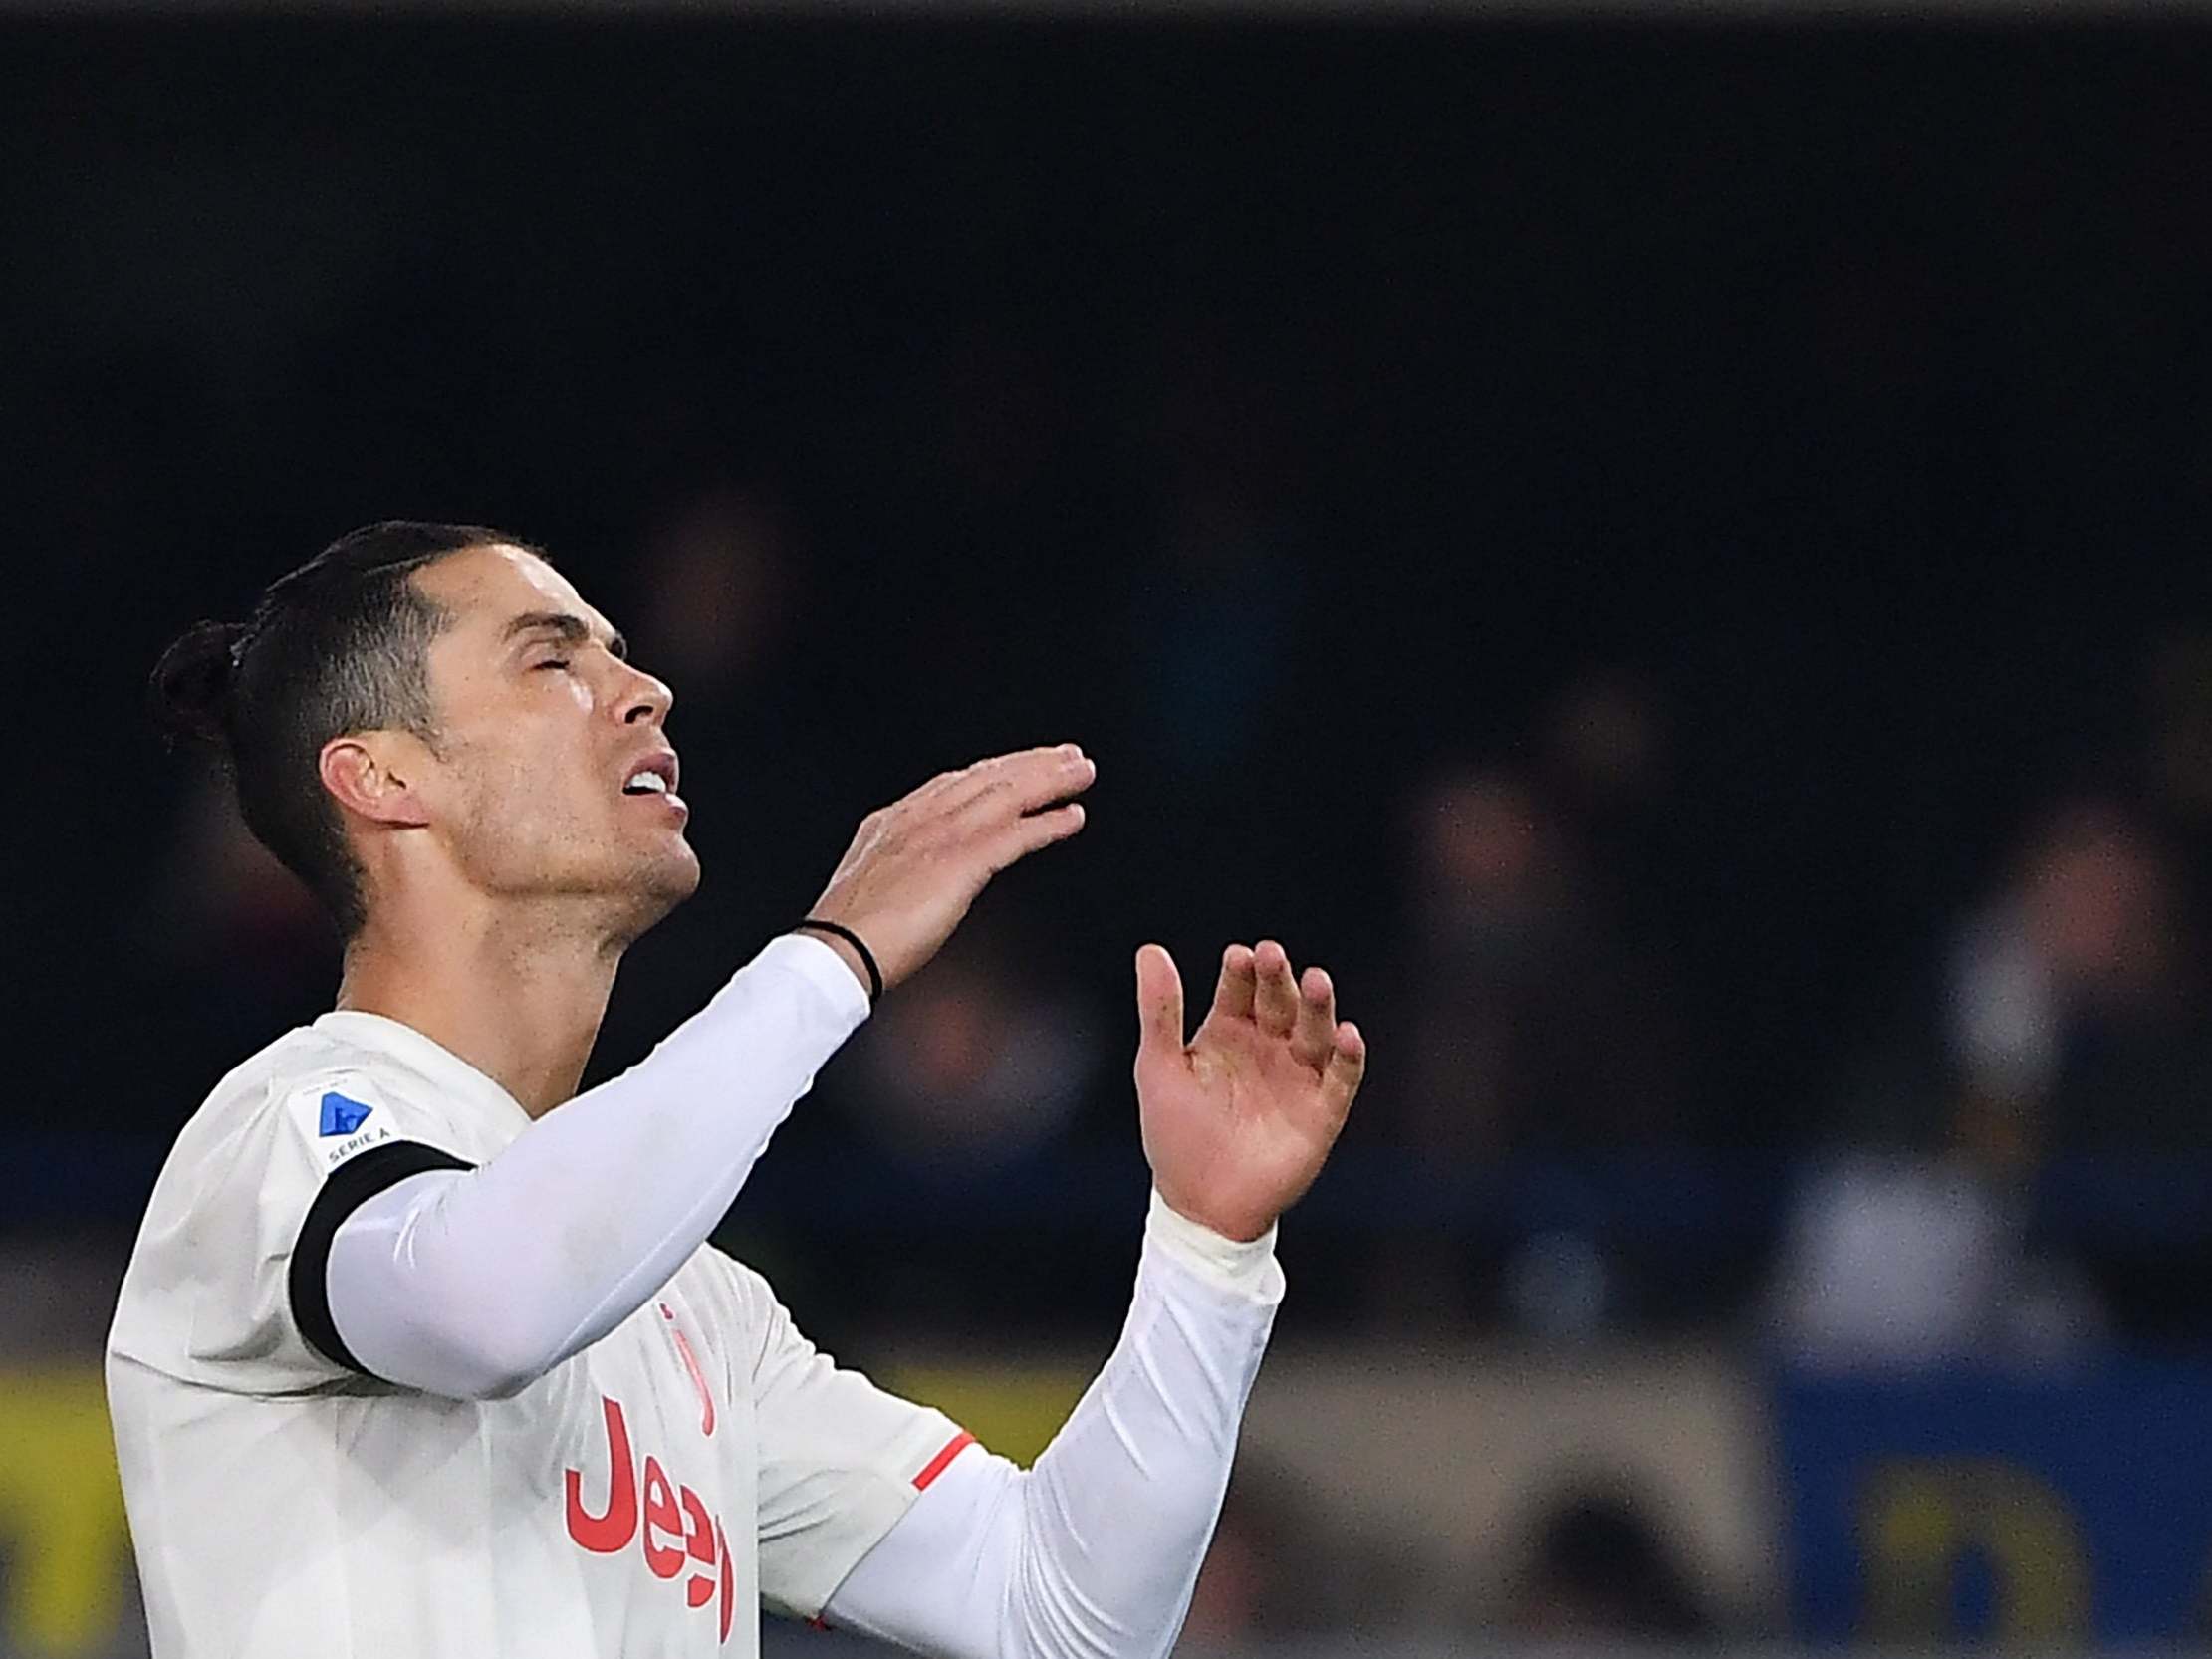 Cristiano Ronaldo sets new Juventus record but Old Lady suffer shock loss to Hellas to open door for Inter Milan